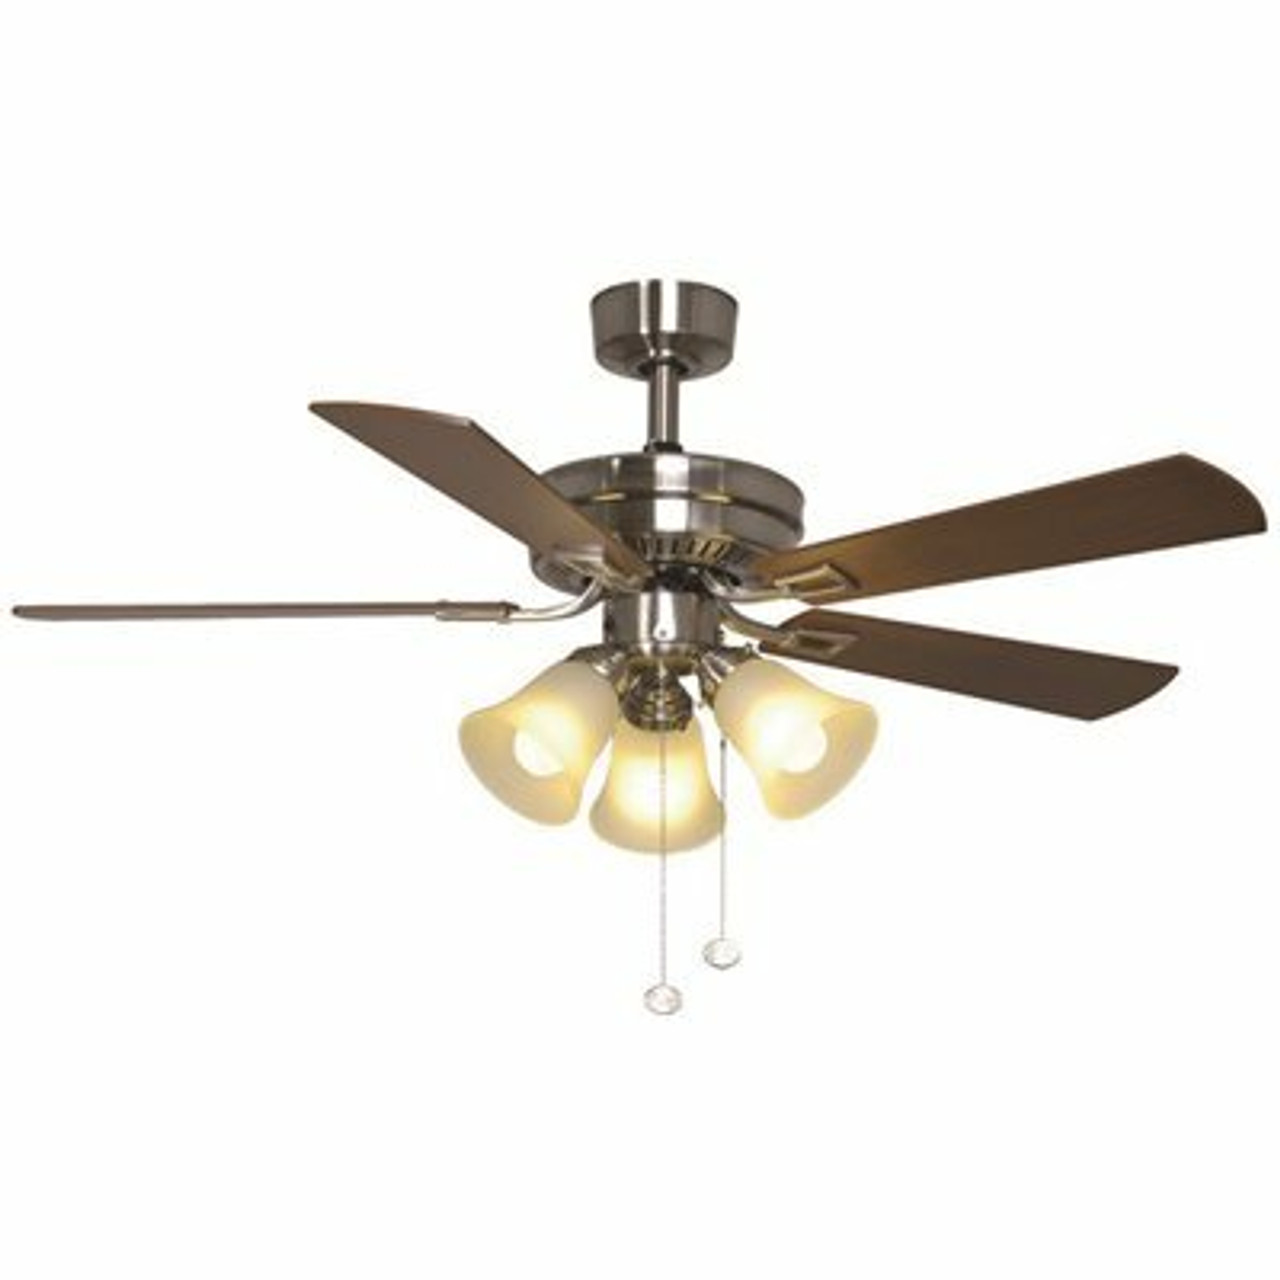 Hampton Bay Sinclair 44 In. Indoor Brushed Nickel Ceiling Fan With Light Kit